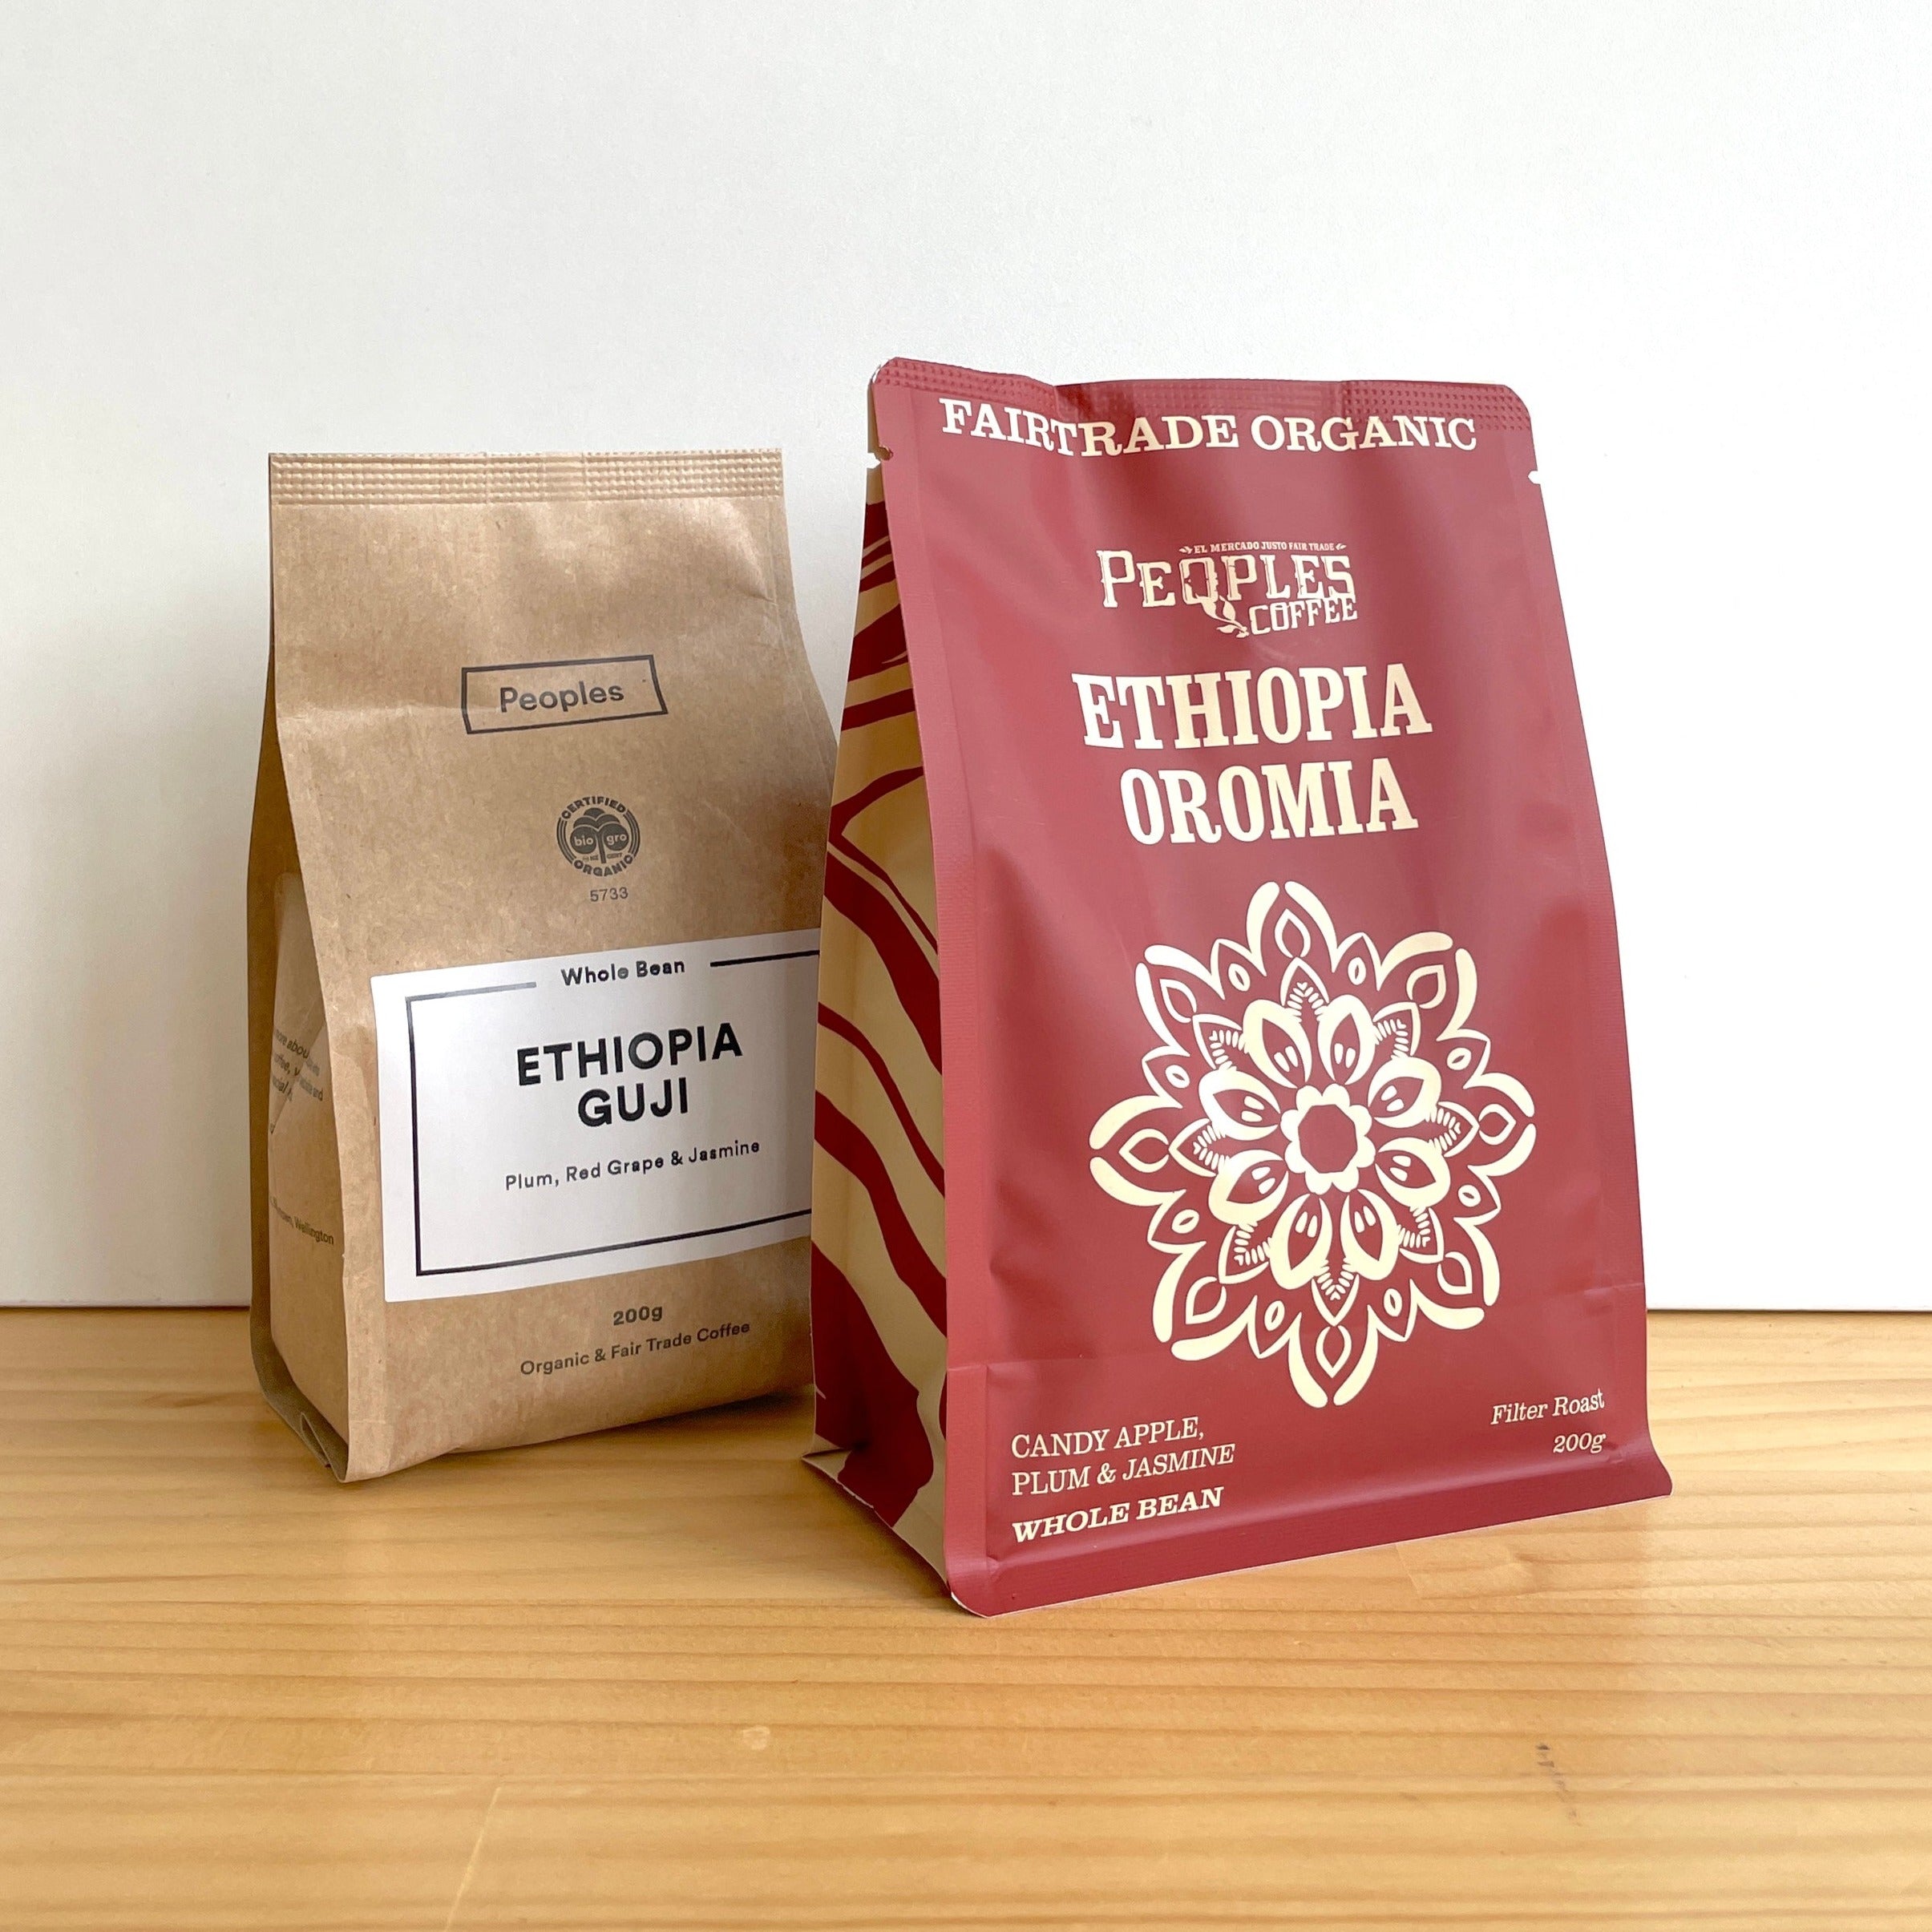 Limited Special - Ethiopia Guji New Bag + Old Bag Deal